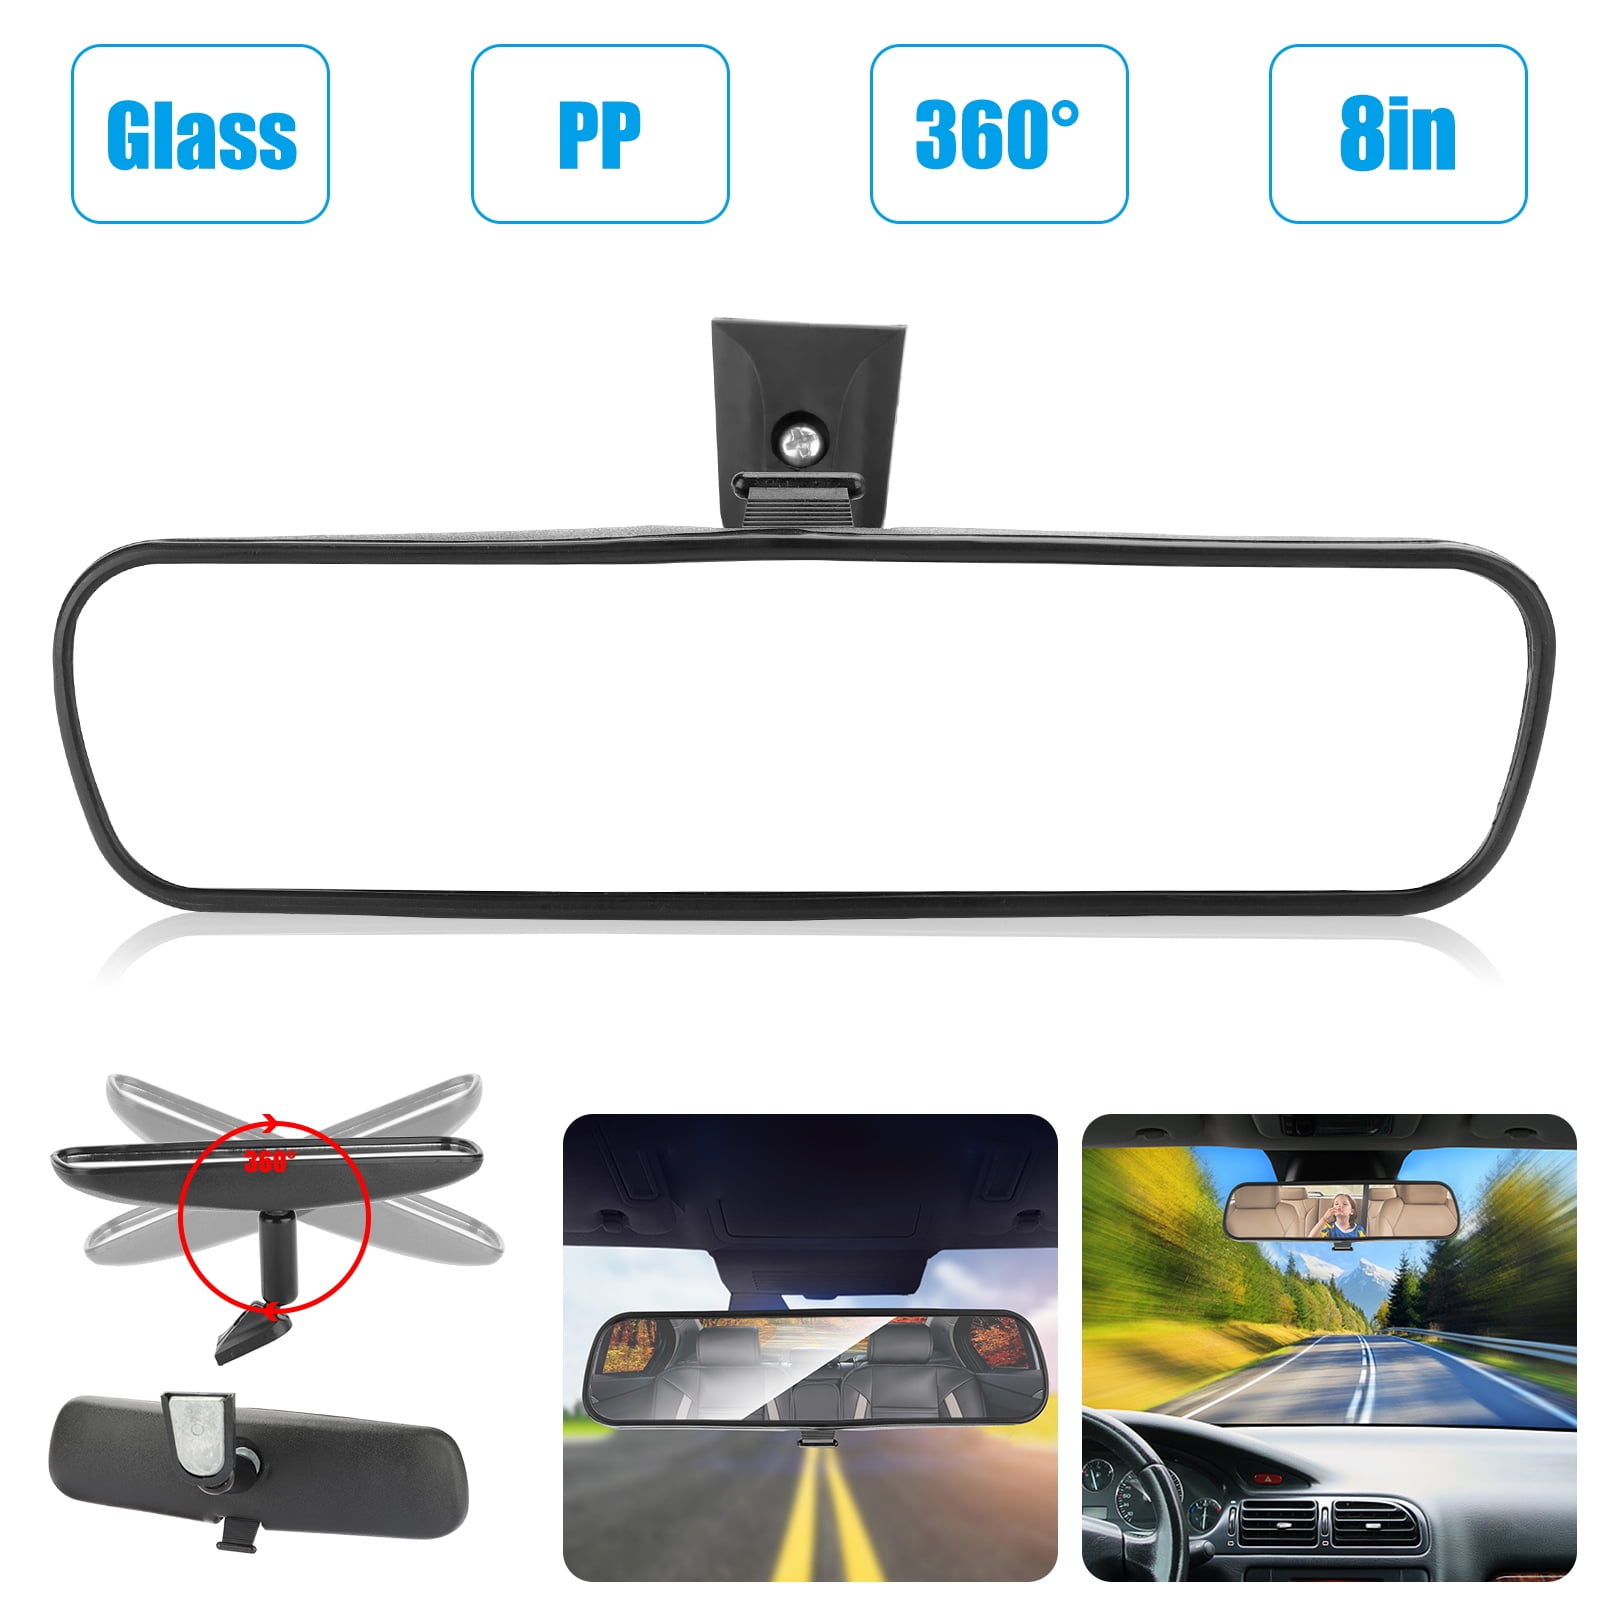 Dealsplaza Car Rearview Mirrors Car Universal 12 Interior Clip On Panoramic Rear View Mirror Wide Angle Rear View Mirror 12 L x 2.8 H 